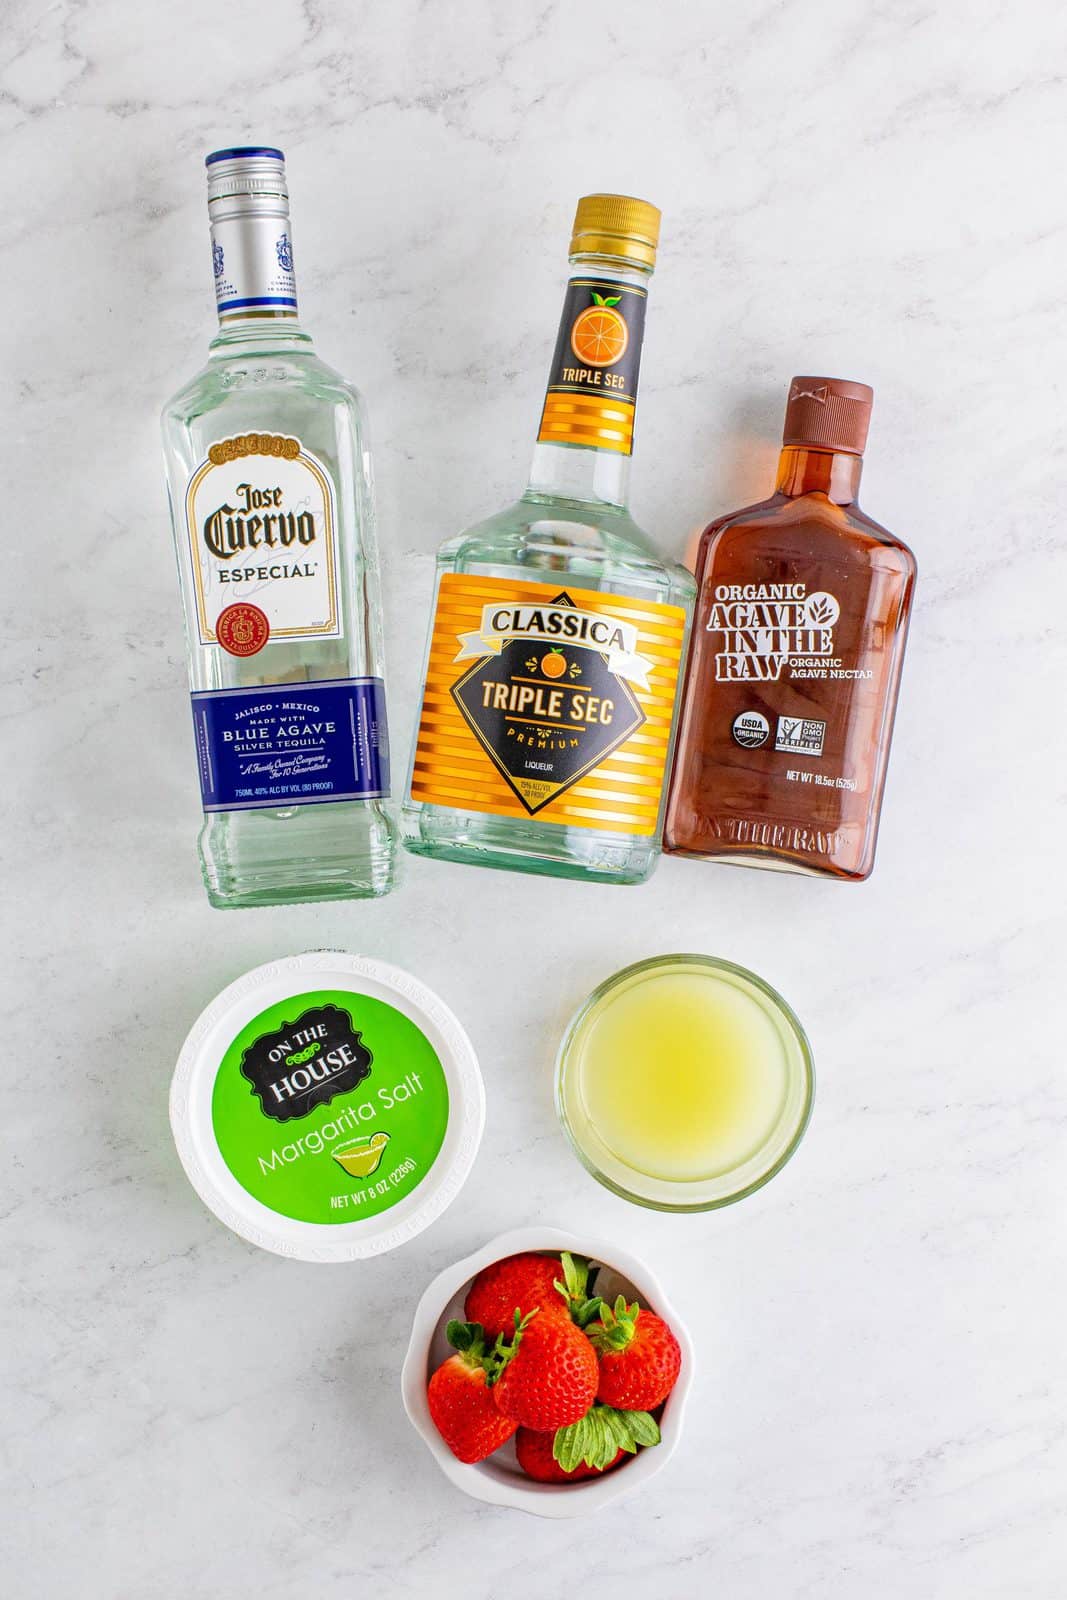 Ingredients needed: strawberries, tequila, triple sec, lime juice, agave syrup, Margarita salt, ice and limes.